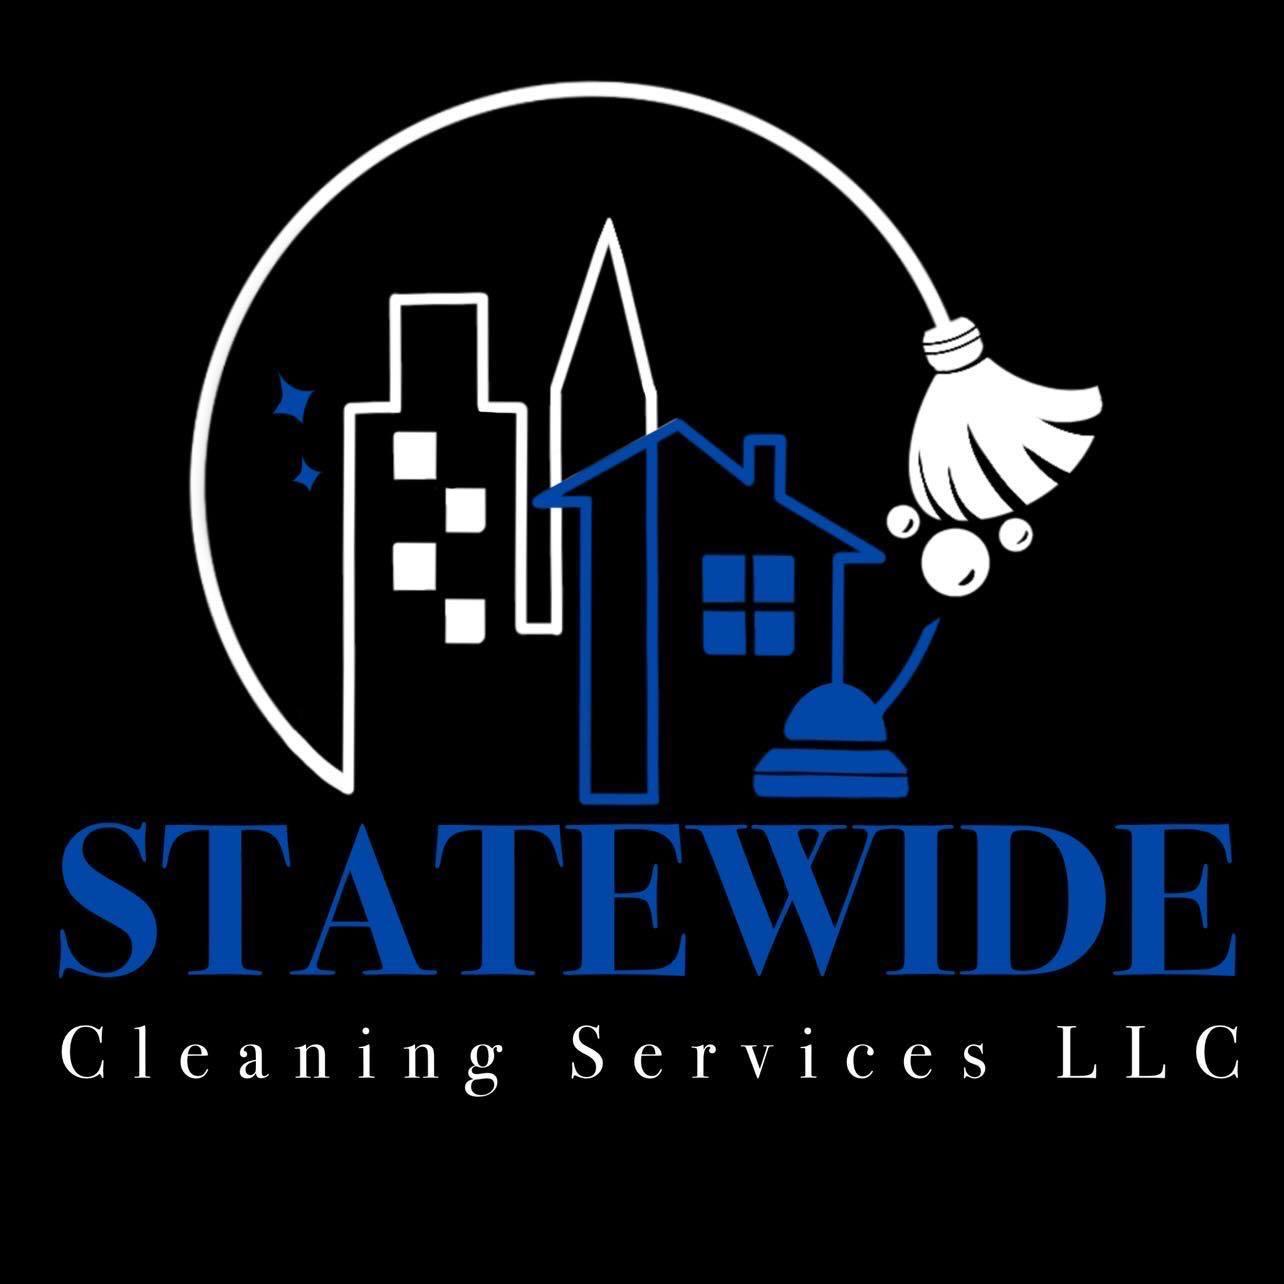 Statewide cleaning services - Philadelphia, PA 19103 - (215)602-3489 | ShowMeLocal.com